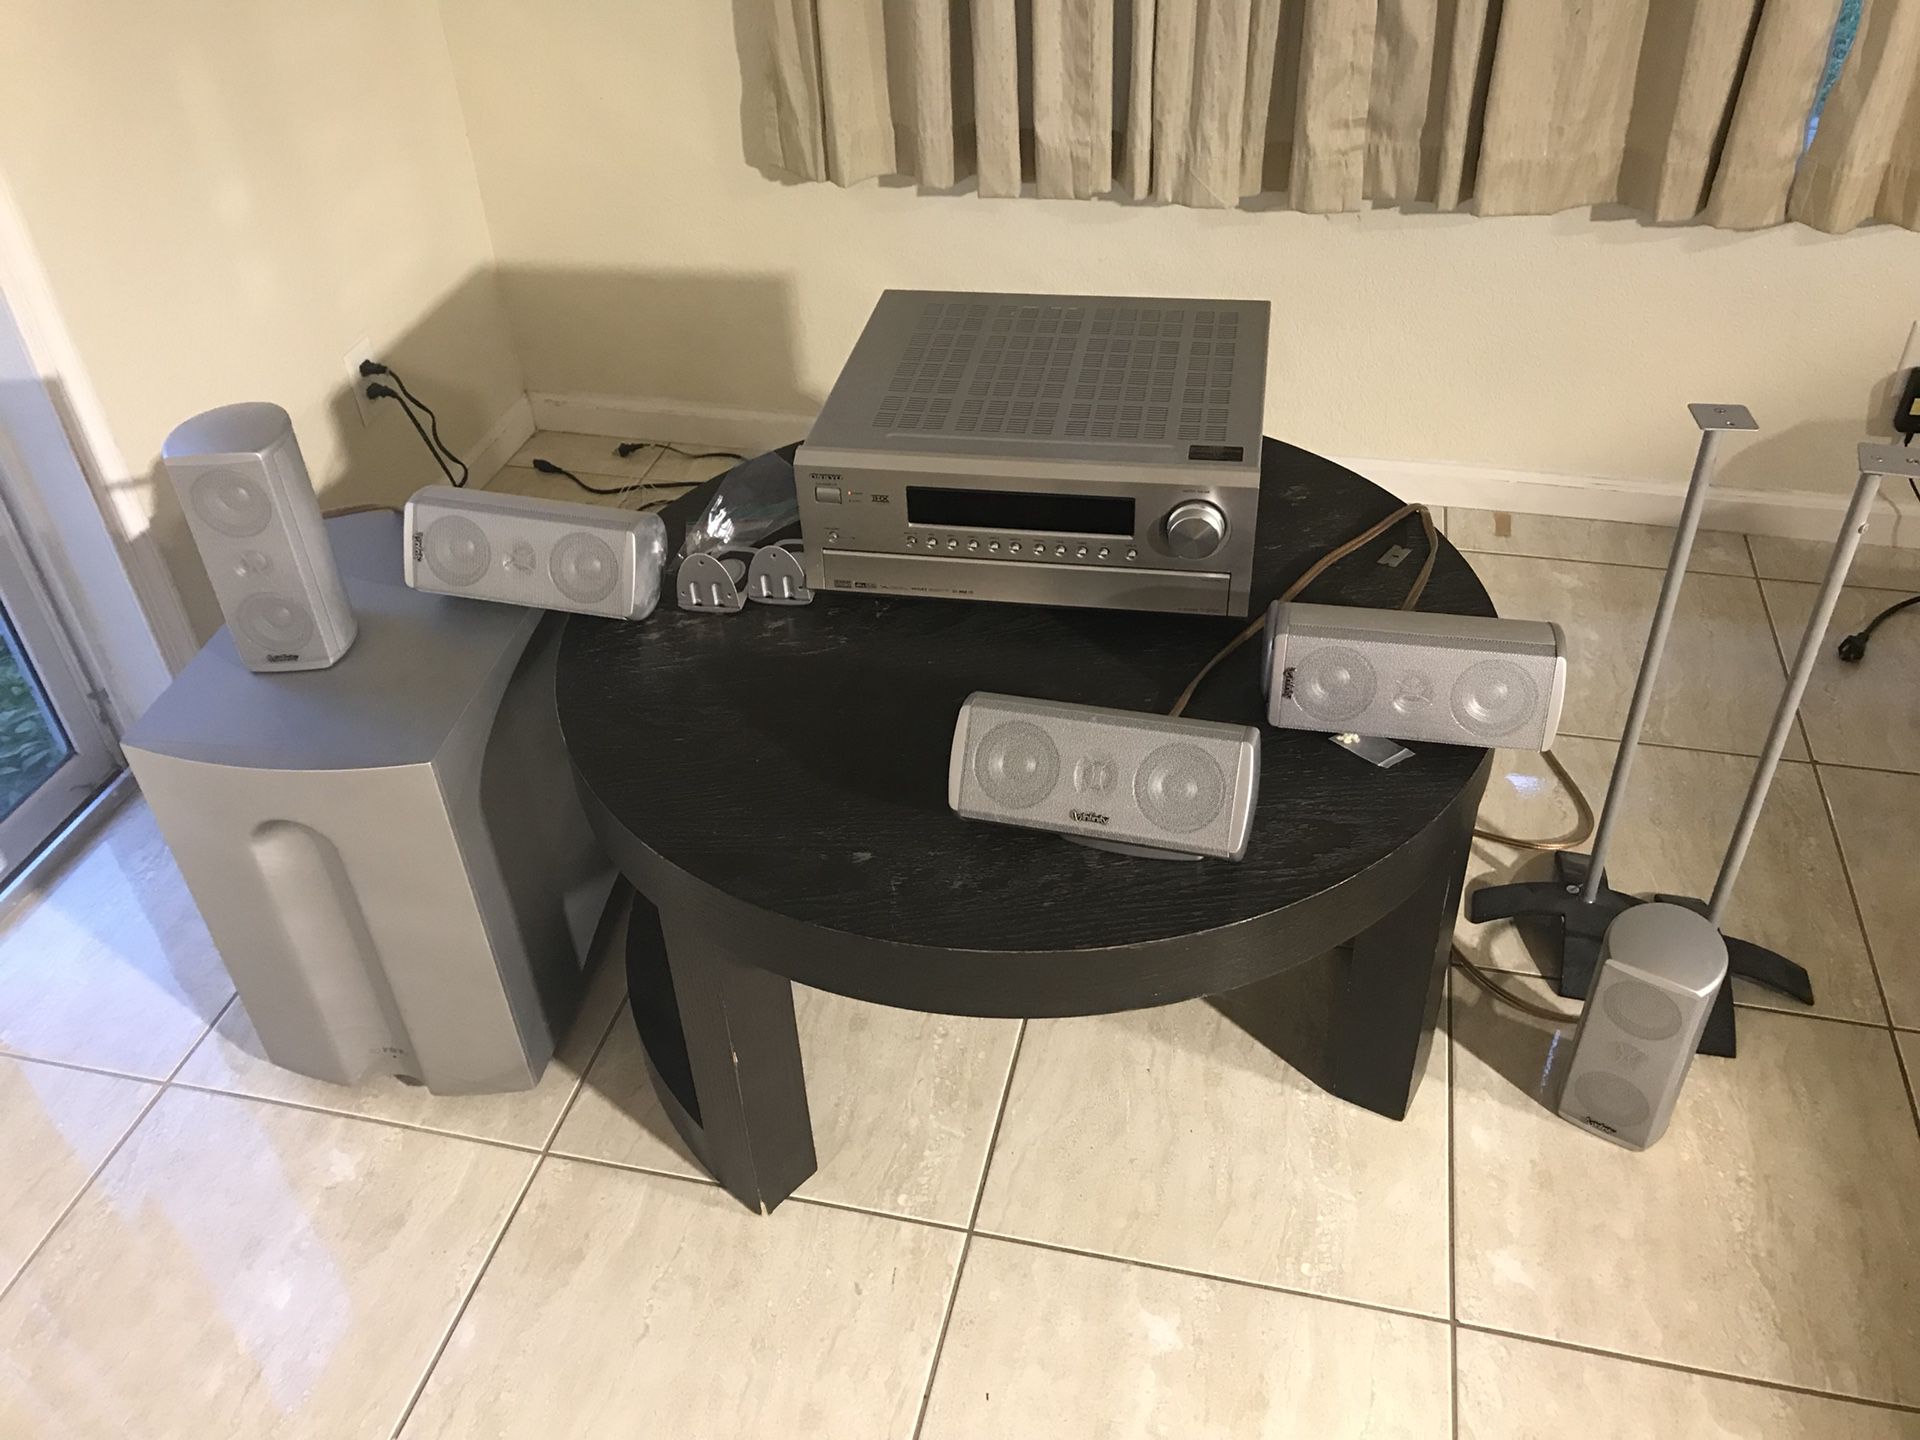 Onkyo surround sound system with infinity speakers